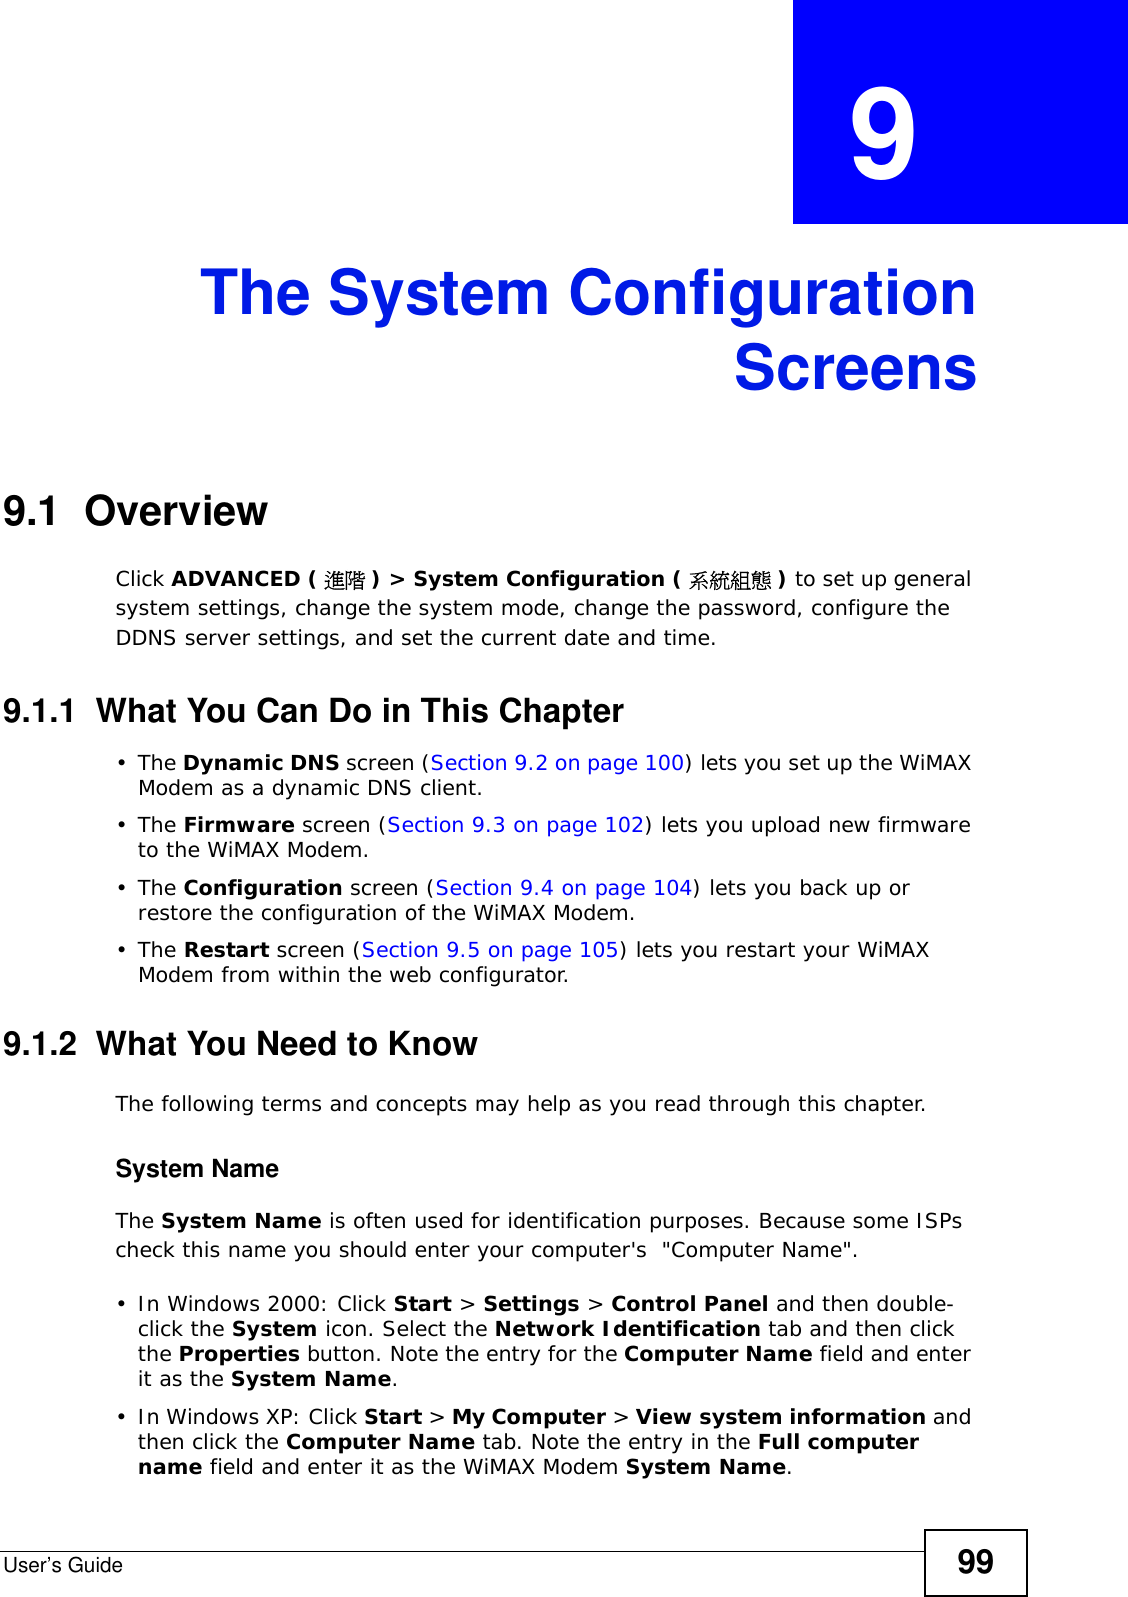 User’s Guide 99CHAPTER  9 The System ConfigurationScreens9.1  OverviewClick ADVANCED ( 進階 ) &gt; System Configuration ( 系統組態 ) to set up general system settings, change the system mode, change the password, configure the DDNS server settings, and set the current date and time.9.1.1  What You Can Do in This Chapter•The Dynamic DNS screen (Section 9.2 on page 100) lets you set up the WiMAX Modem as a dynamic DNS client.•The Firmware screen (Section 9.3 on page 102) lets you upload new firmware to the WiMAX Modem.•The Configuration screen (Section 9.4 on page 104) lets you back up or restore the configuration of the WiMAX Modem.•The Restart screen (Section 9.5 on page 105) lets you restart your WiMAX Modem from within the web configurator.9.1.2  What You Need to KnowThe following terms and concepts may help as you read through this chapter.System NameThe System Name is often used for identification purposes. Because some ISPs check this name you should enter your computer&apos;s  &quot;Computer Name&quot;. • In Windows 2000: Click Start &gt; Settings &gt; Control Panel and then double-click the System icon. Select the Network Identification tab and then click the Properties button. Note the entry for the Computer Name field and enter it as the System Name.• In Windows XP: Click Start &gt; My Computer &gt; View system information and then click the Computer Name tab. Note the entry in the Full computer name field and enter it as the WiMAX Modem System Name.